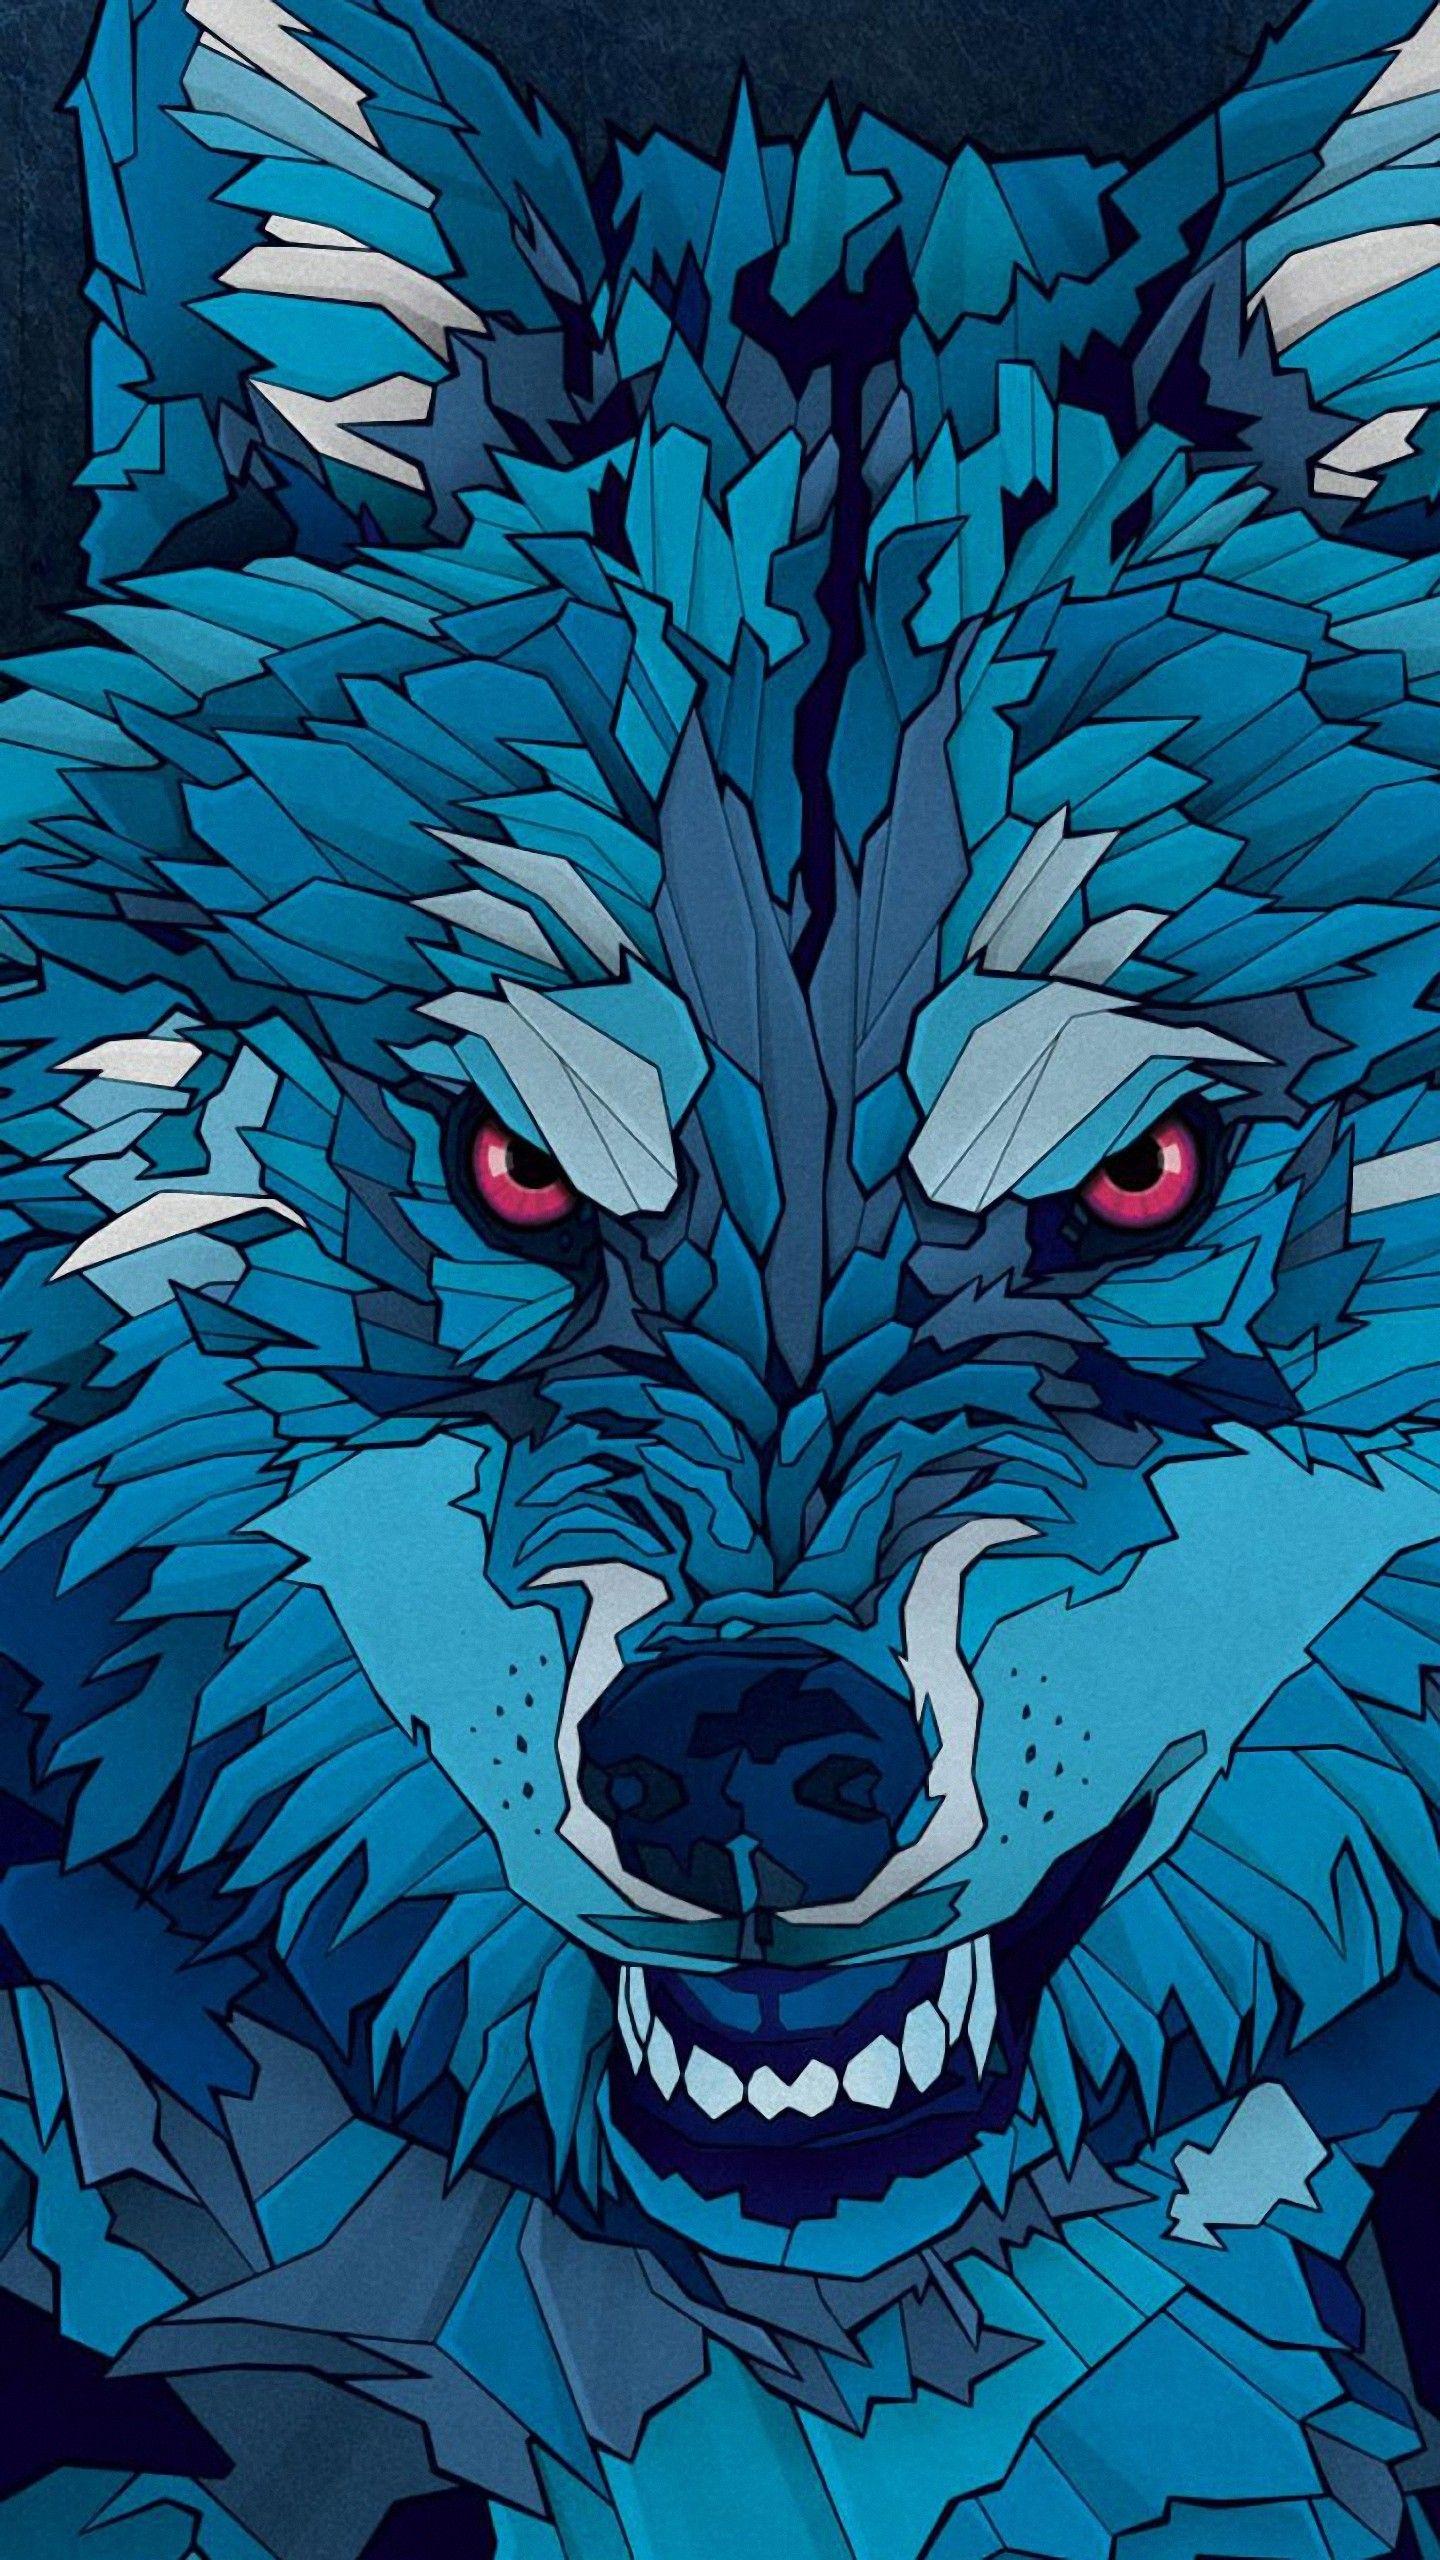 Animated Wolf Wallpaper